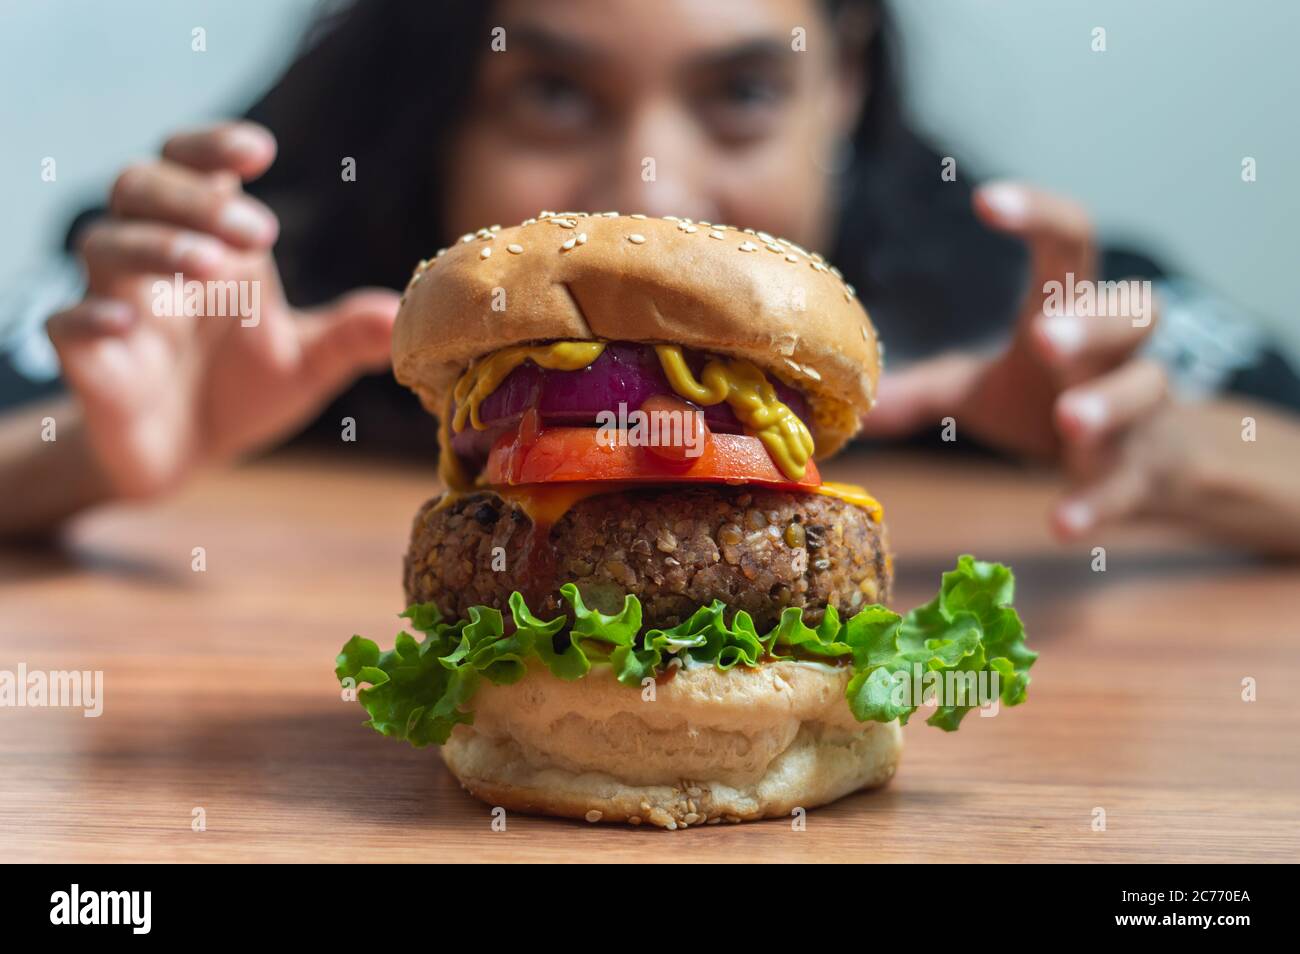 Pretty Mexican girl staring in surprise and grabbing at large vegetarian burger made of beans and lentils Stock Photo